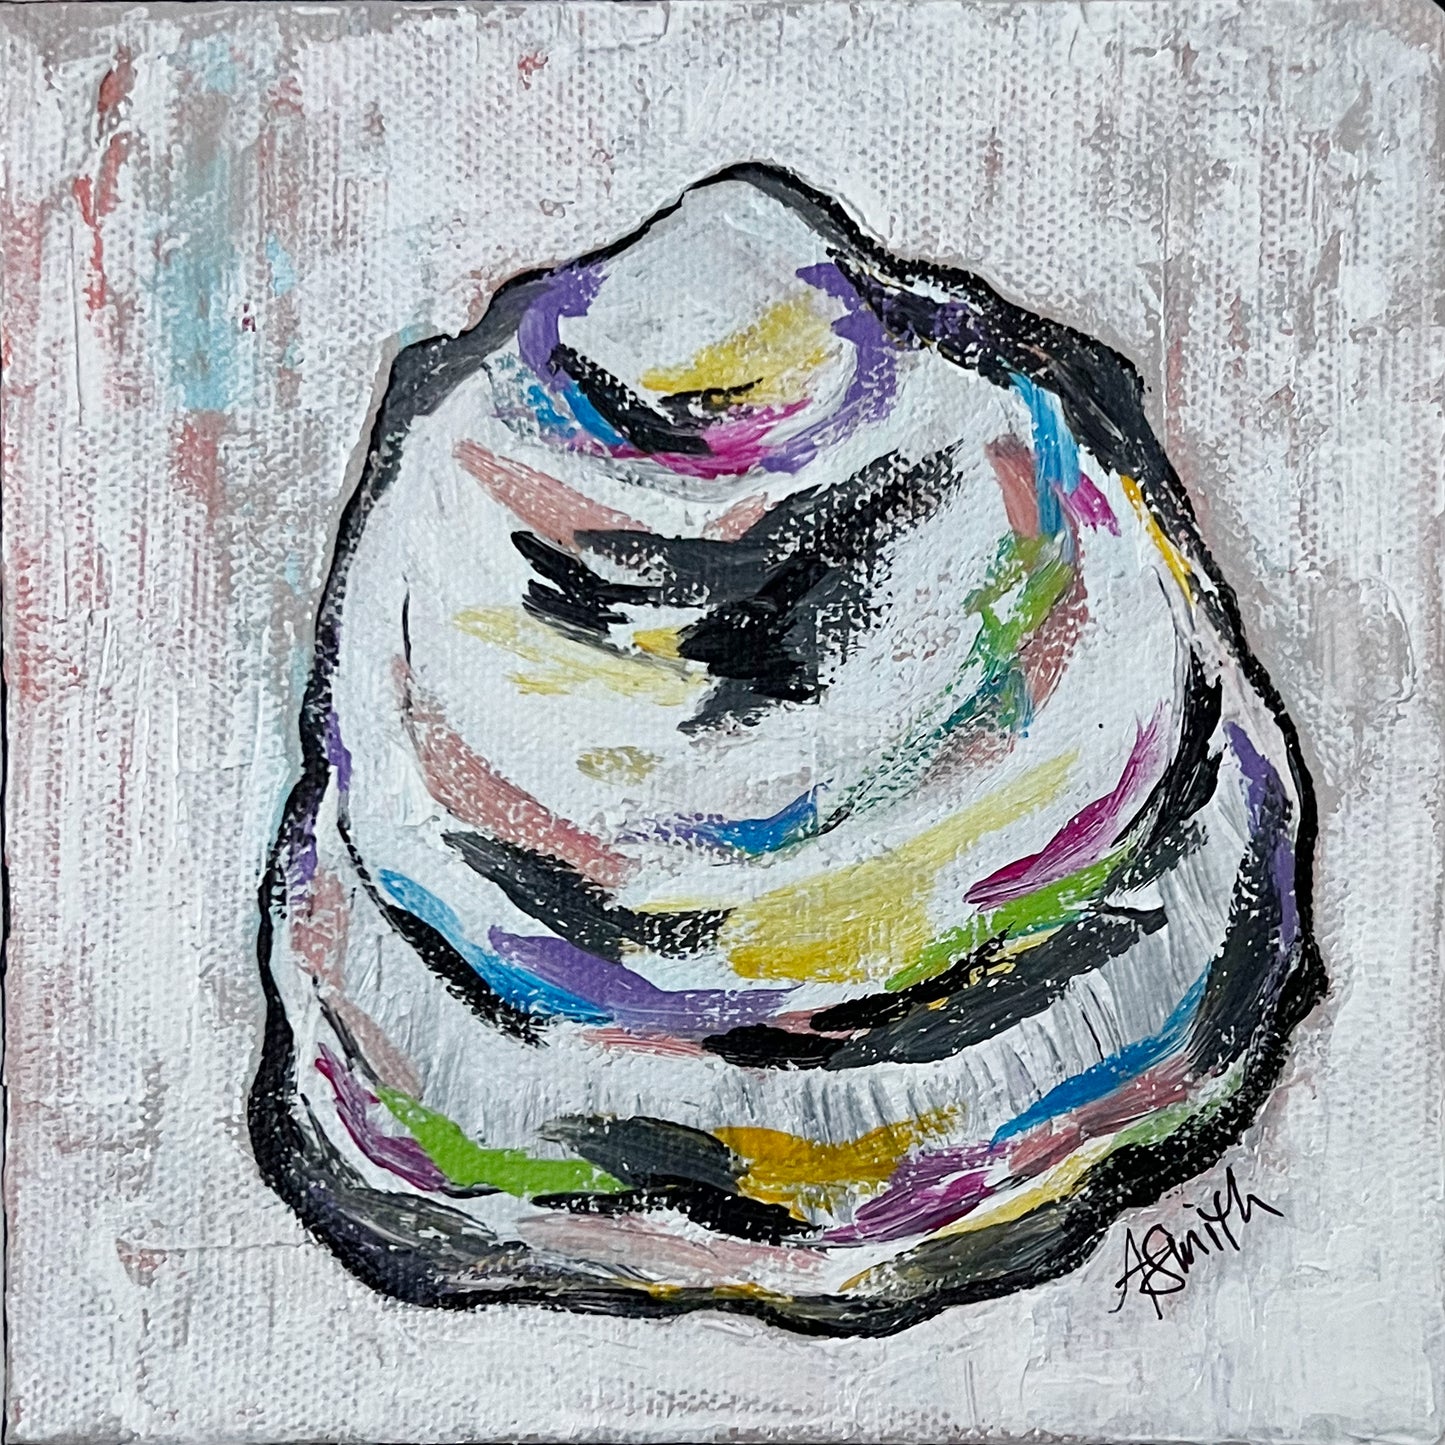 "Elora" Oyster Shell Acrylic Painting, 6x6"